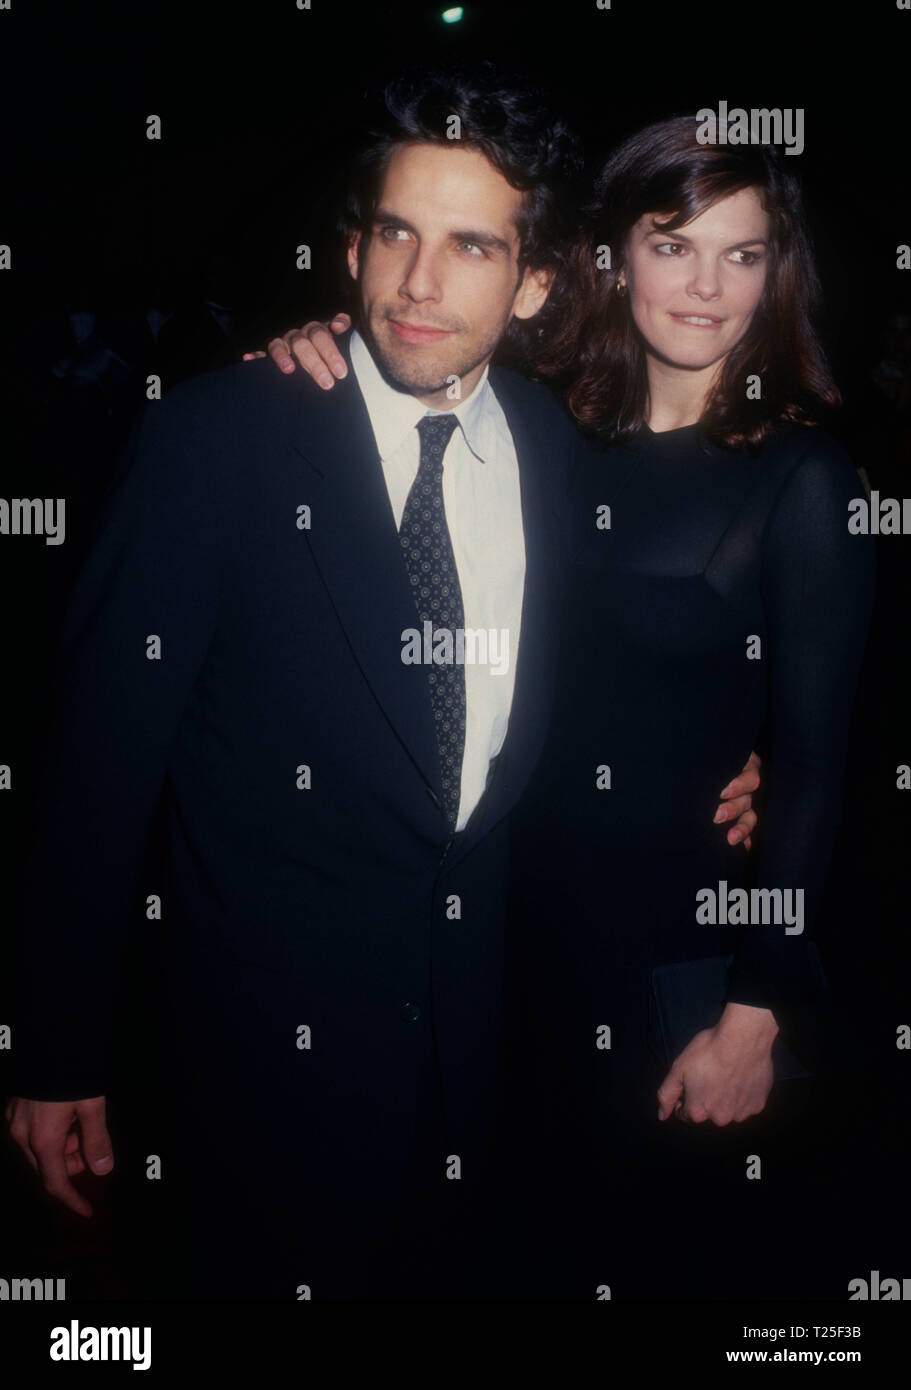 CULVER CITY, CA - MARCH 8: Actor Ben Stiller and actress Jeanne Tripplehorn  attend the 20th Annual People's Choice Awards on March 8, 1994 at Sony  Picture Studios in Culver City, California.